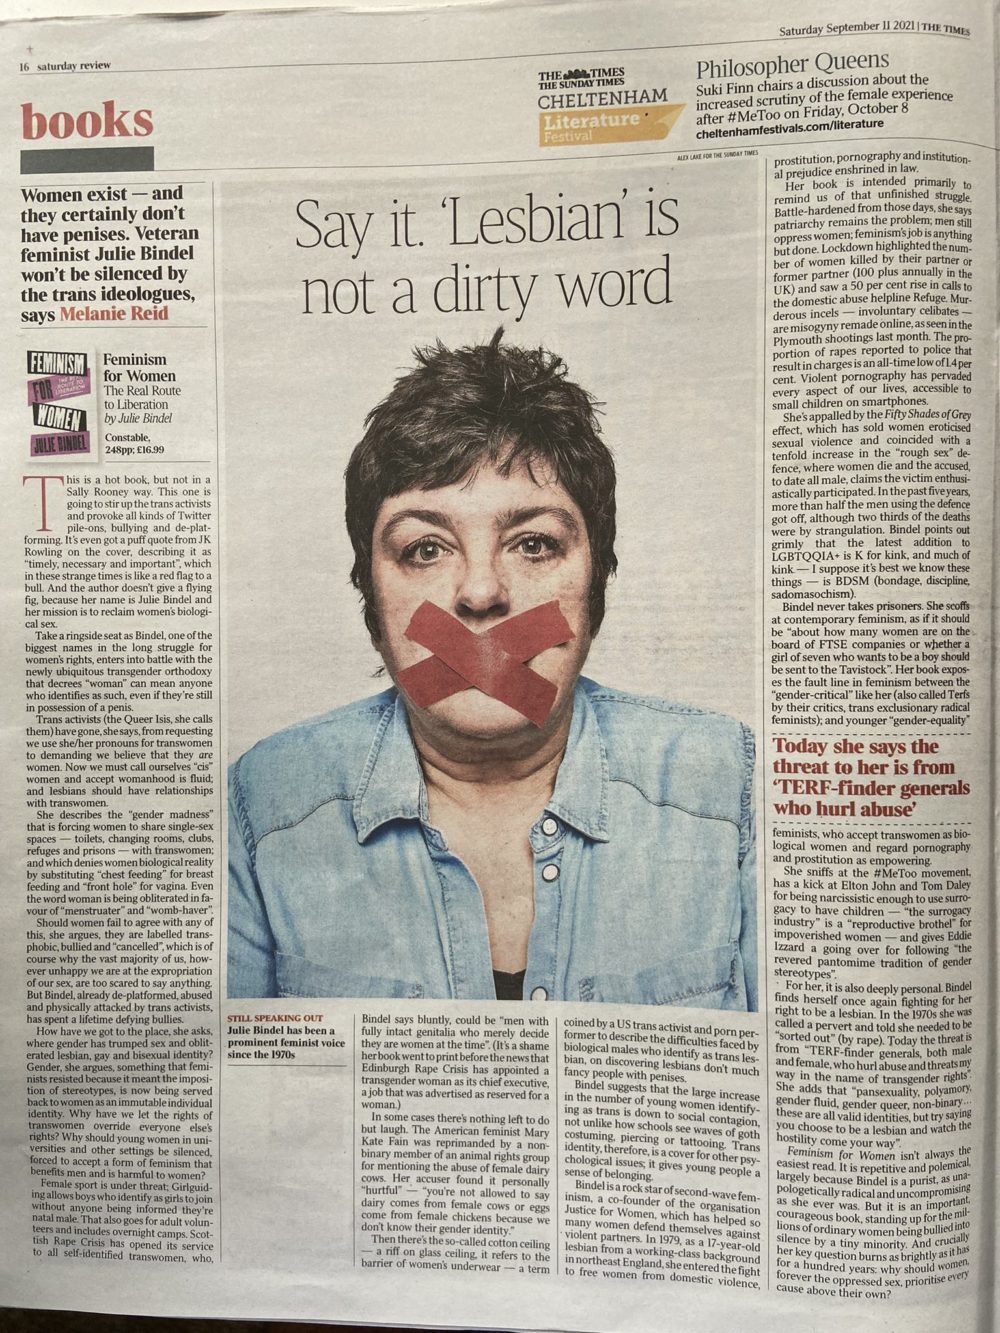 Just one of the many times Julie Bindel has put tape over her own mouth for an article in a national newspaper to show how she is being silenced. This one was in the Guardian some time ago